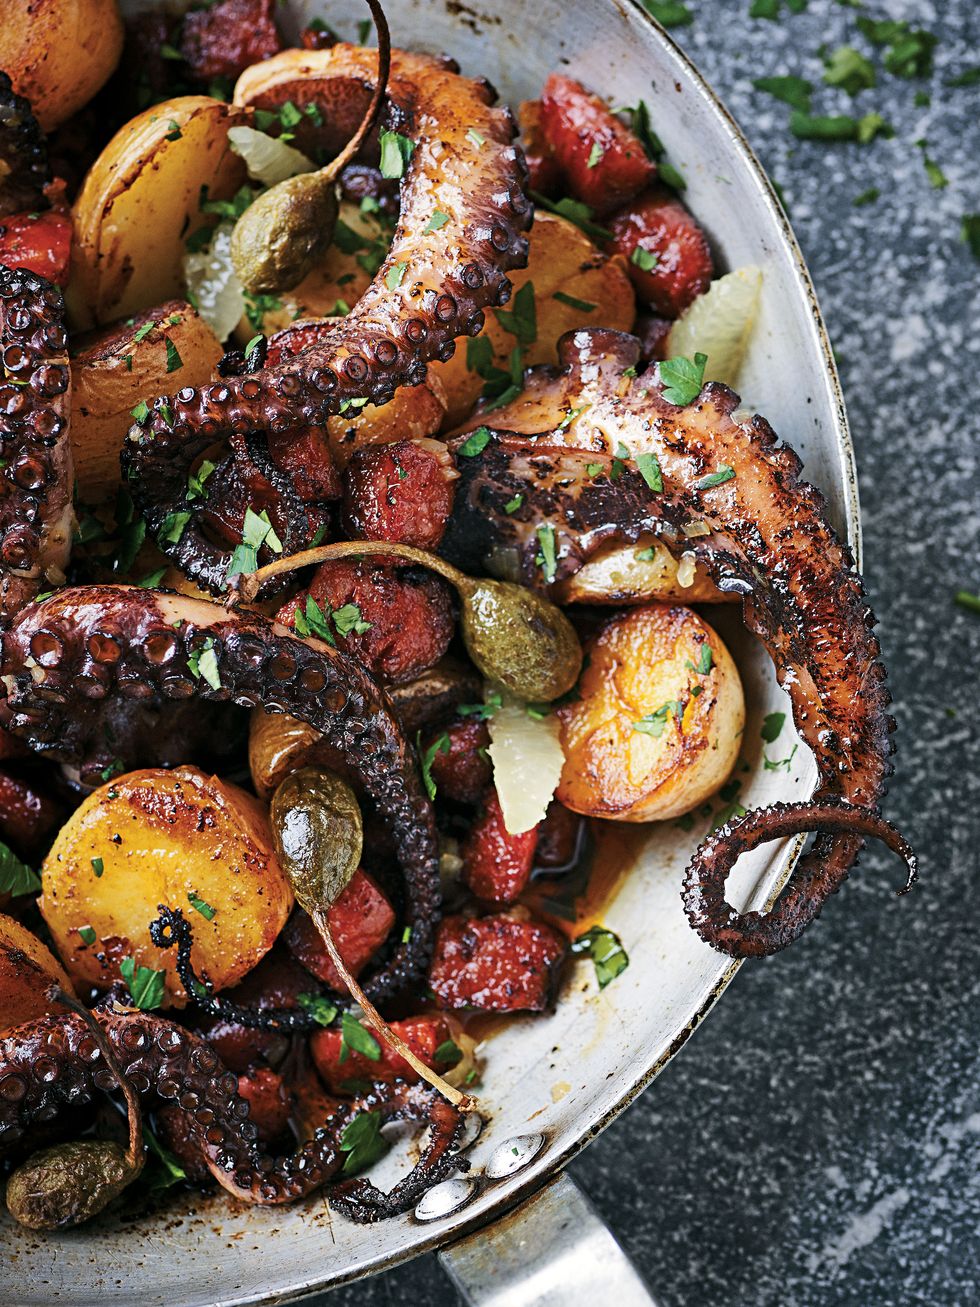 Roasted Octopus with Chorizo, Potato and Caper Berries